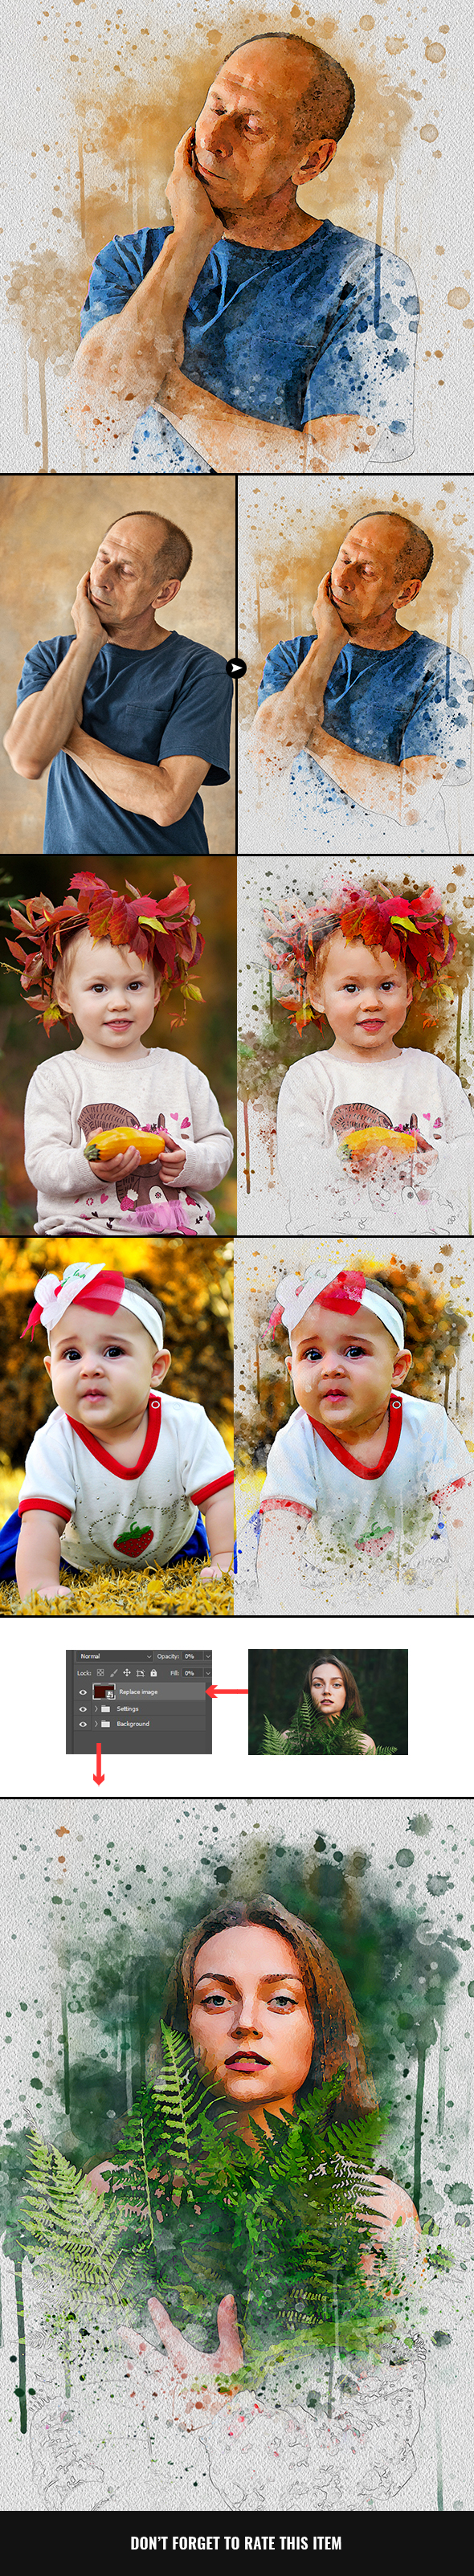 [DOWNLOAD]Watercolor Photo Effect